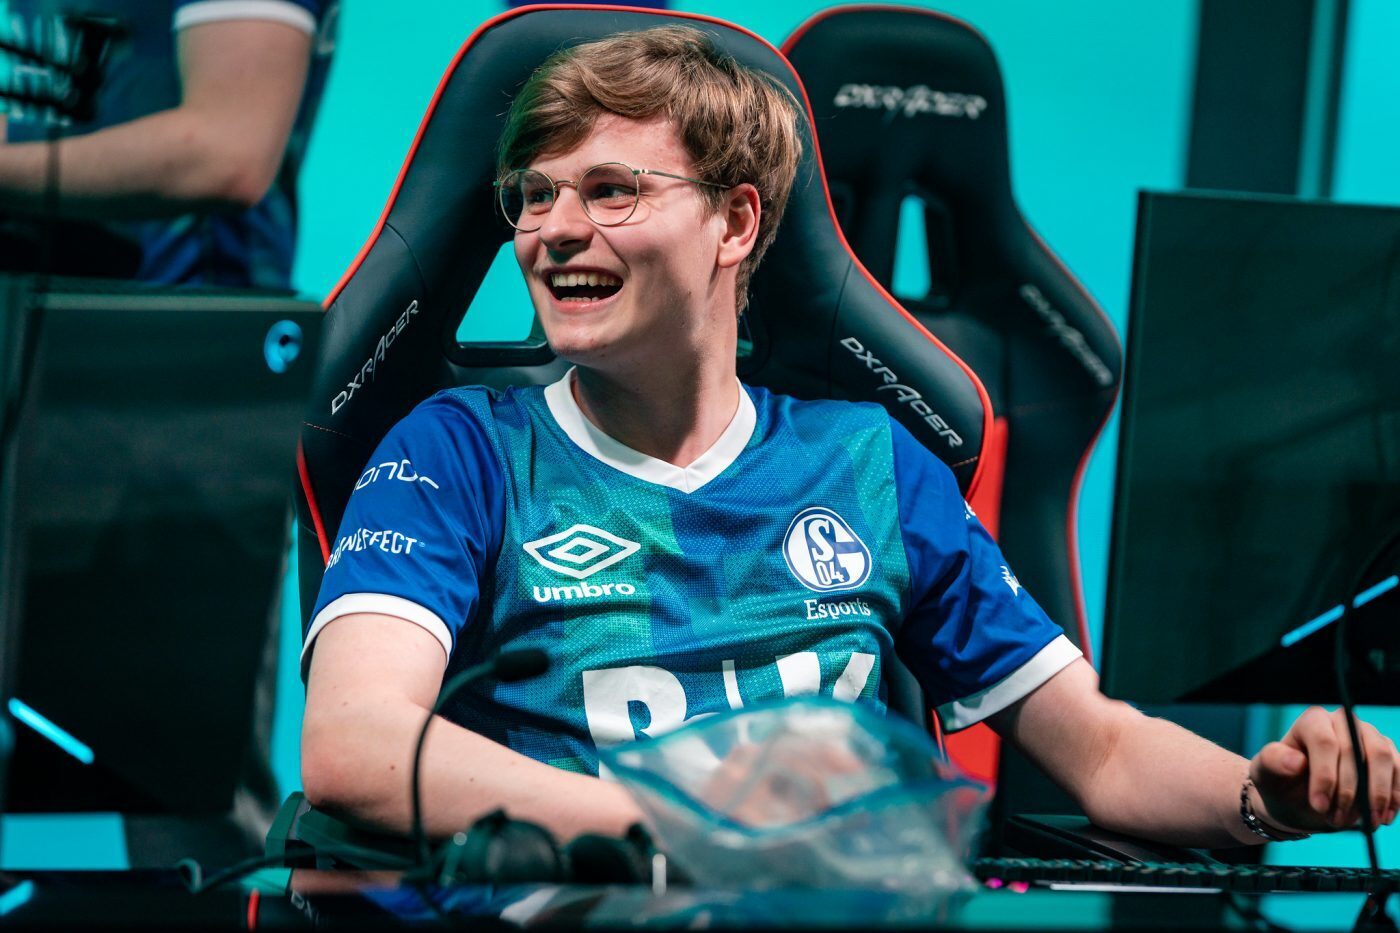 Schalke moves into fourth place with their first 2-0 weekend of LEC Summer 2019. Image via Riot Games.